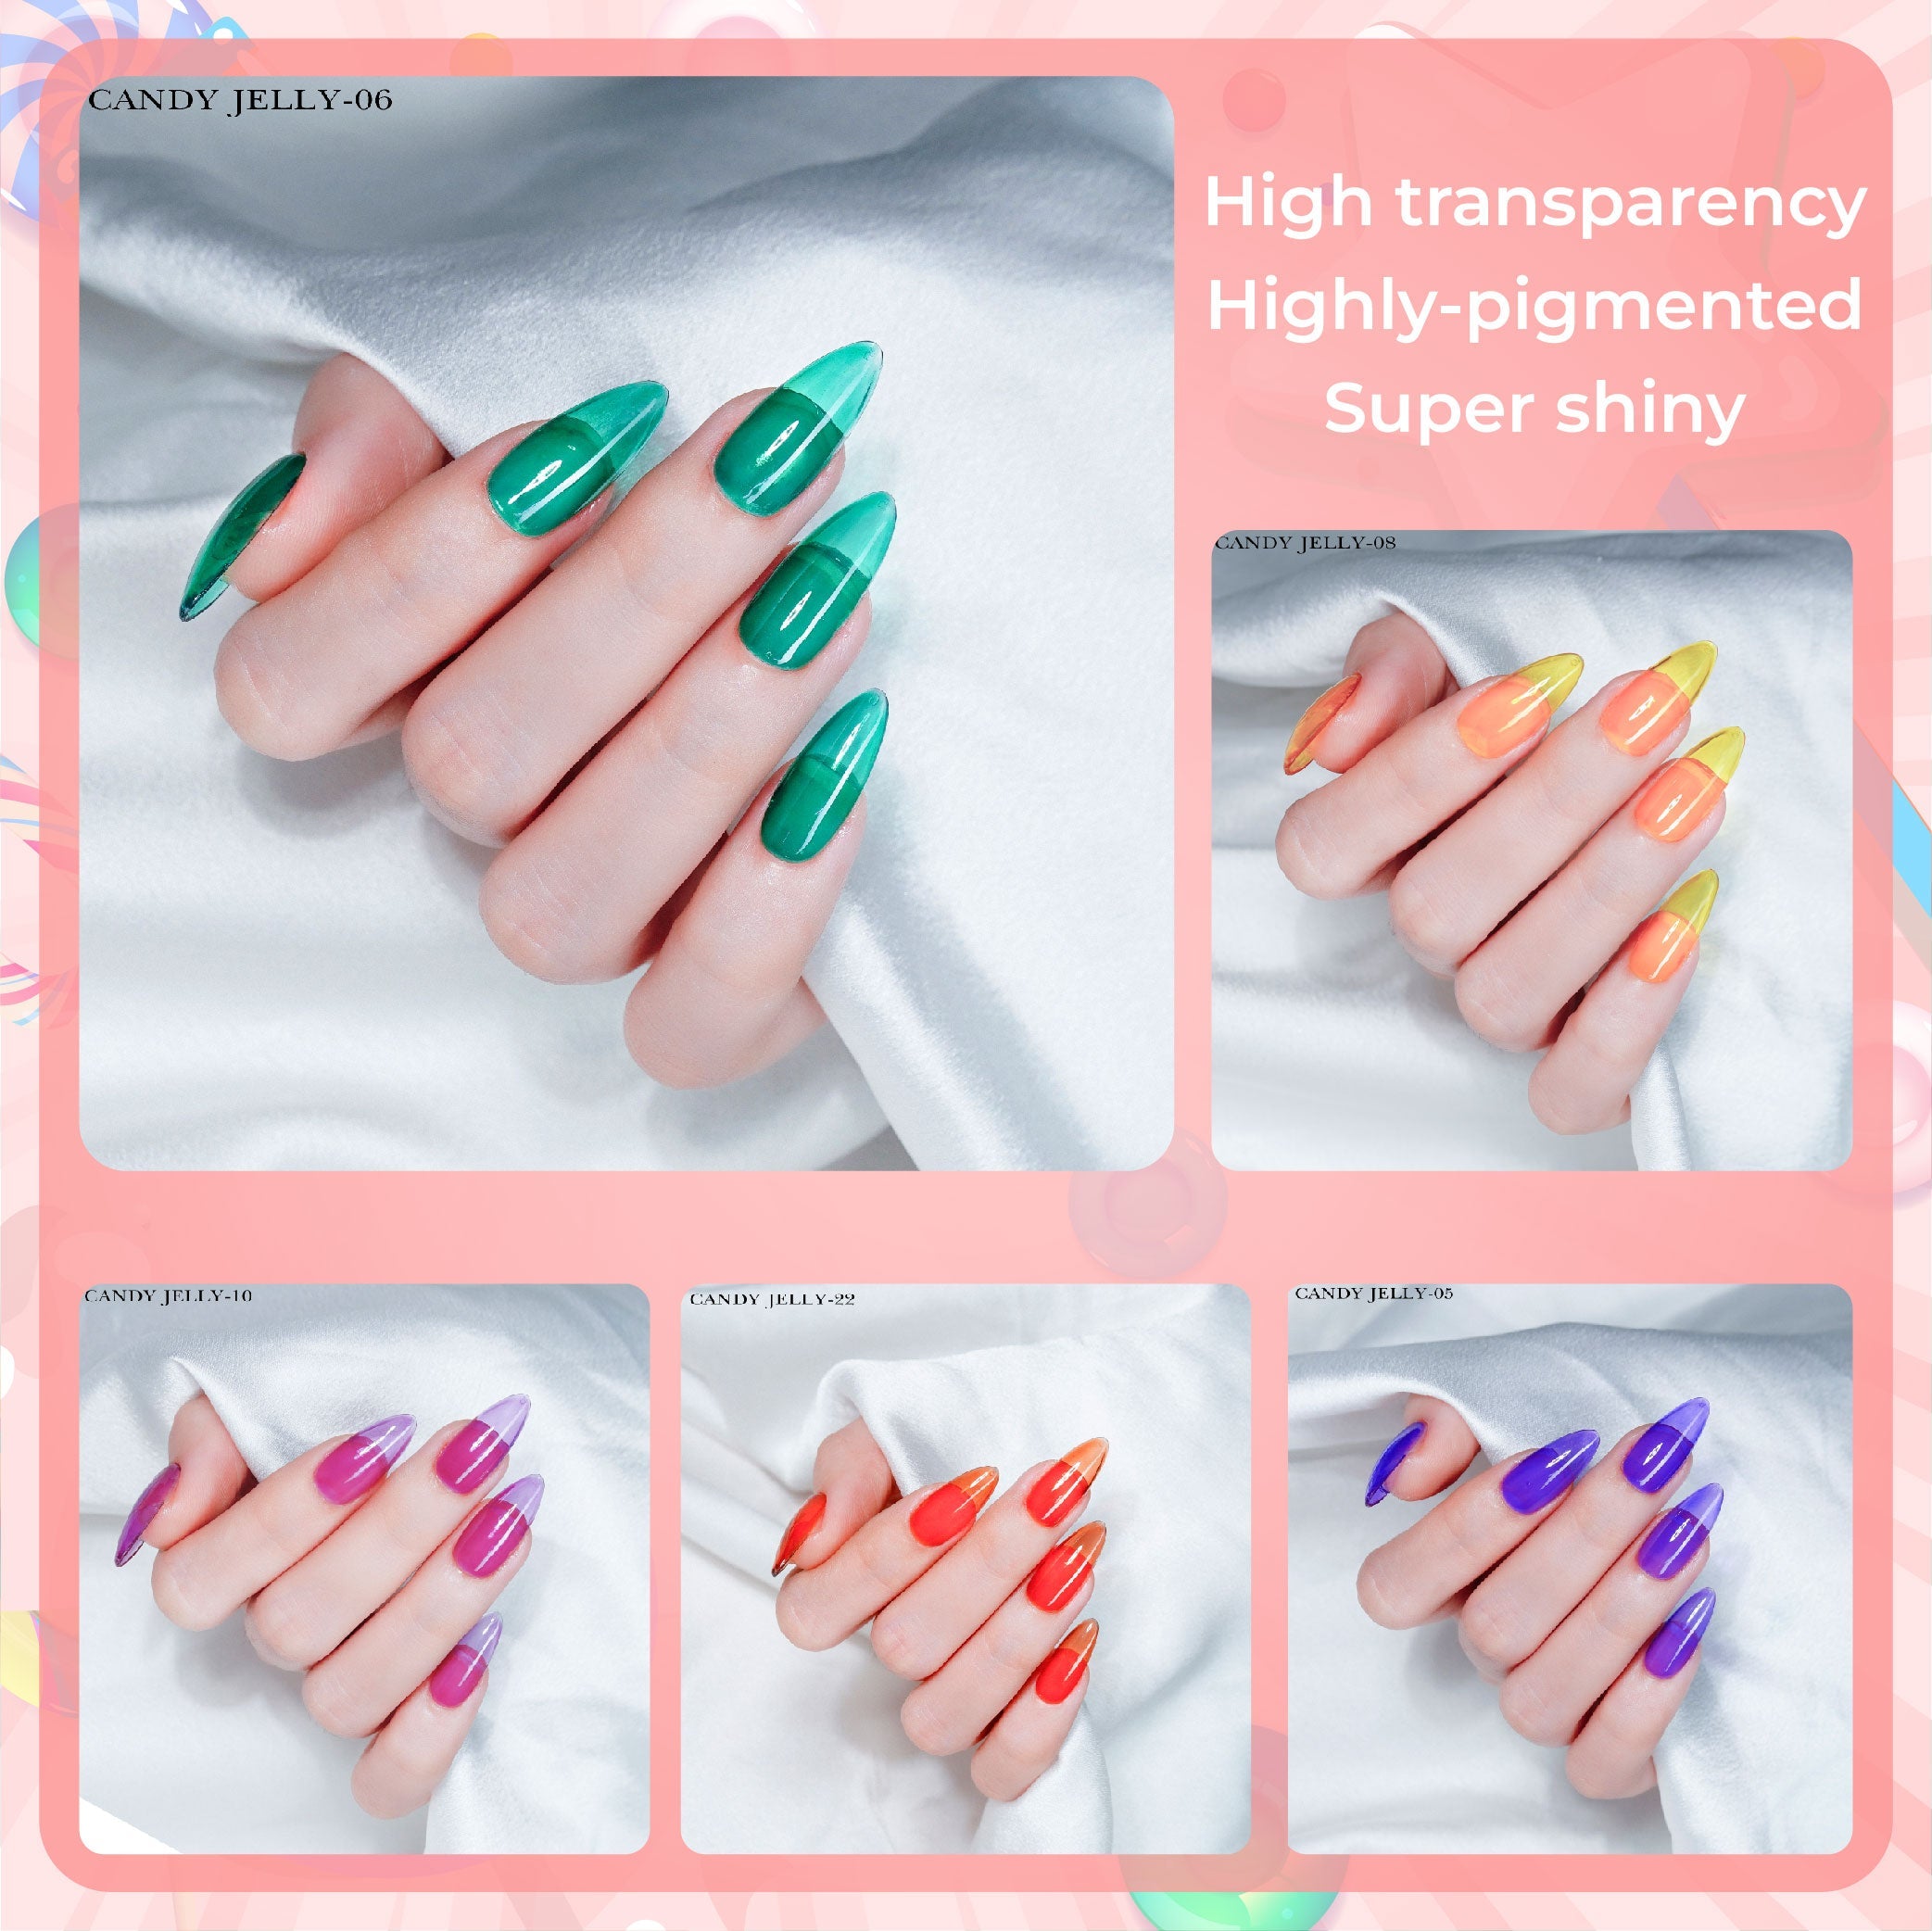 Jelly Gel Polish Colors - Lavis J02-18 - Candy Collection